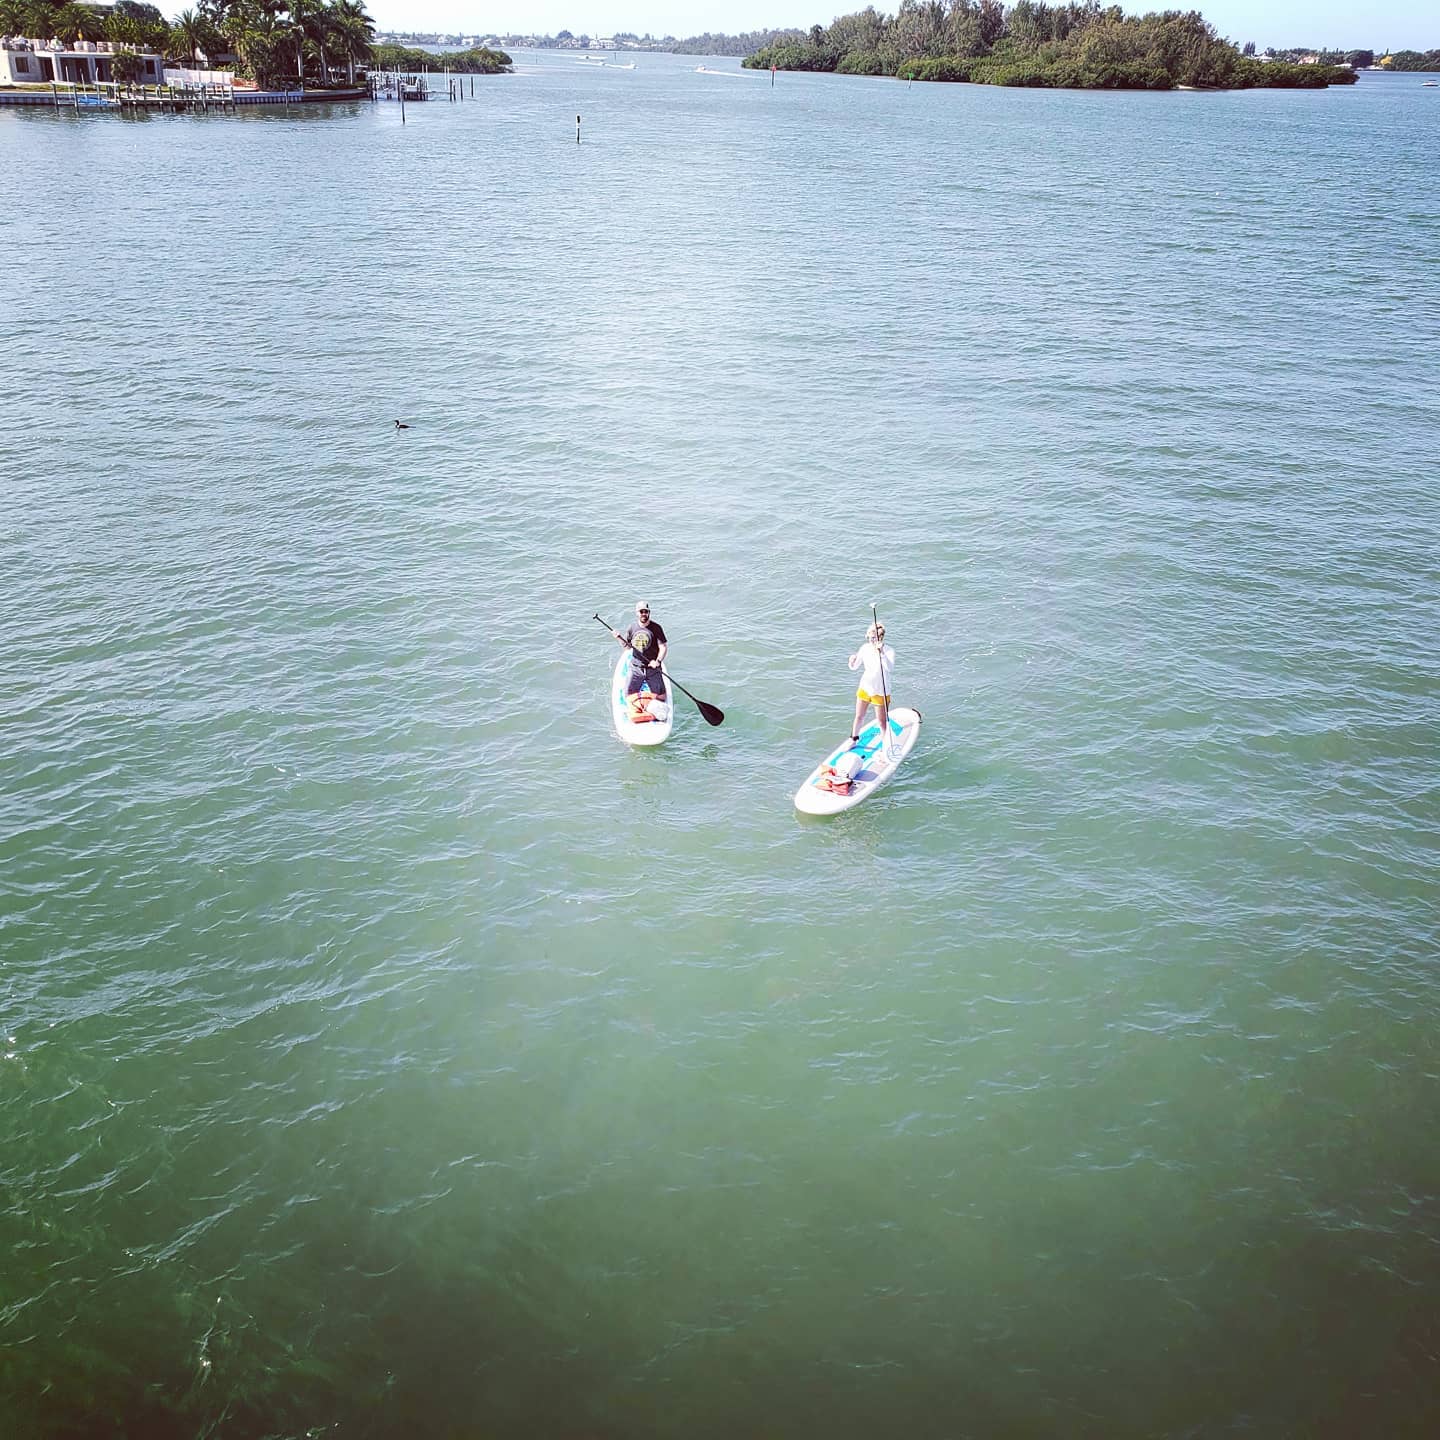 Early morning paddle on the bay! #siestakeypaddleboards #siestakey #siesta #siestakeypaddleboards